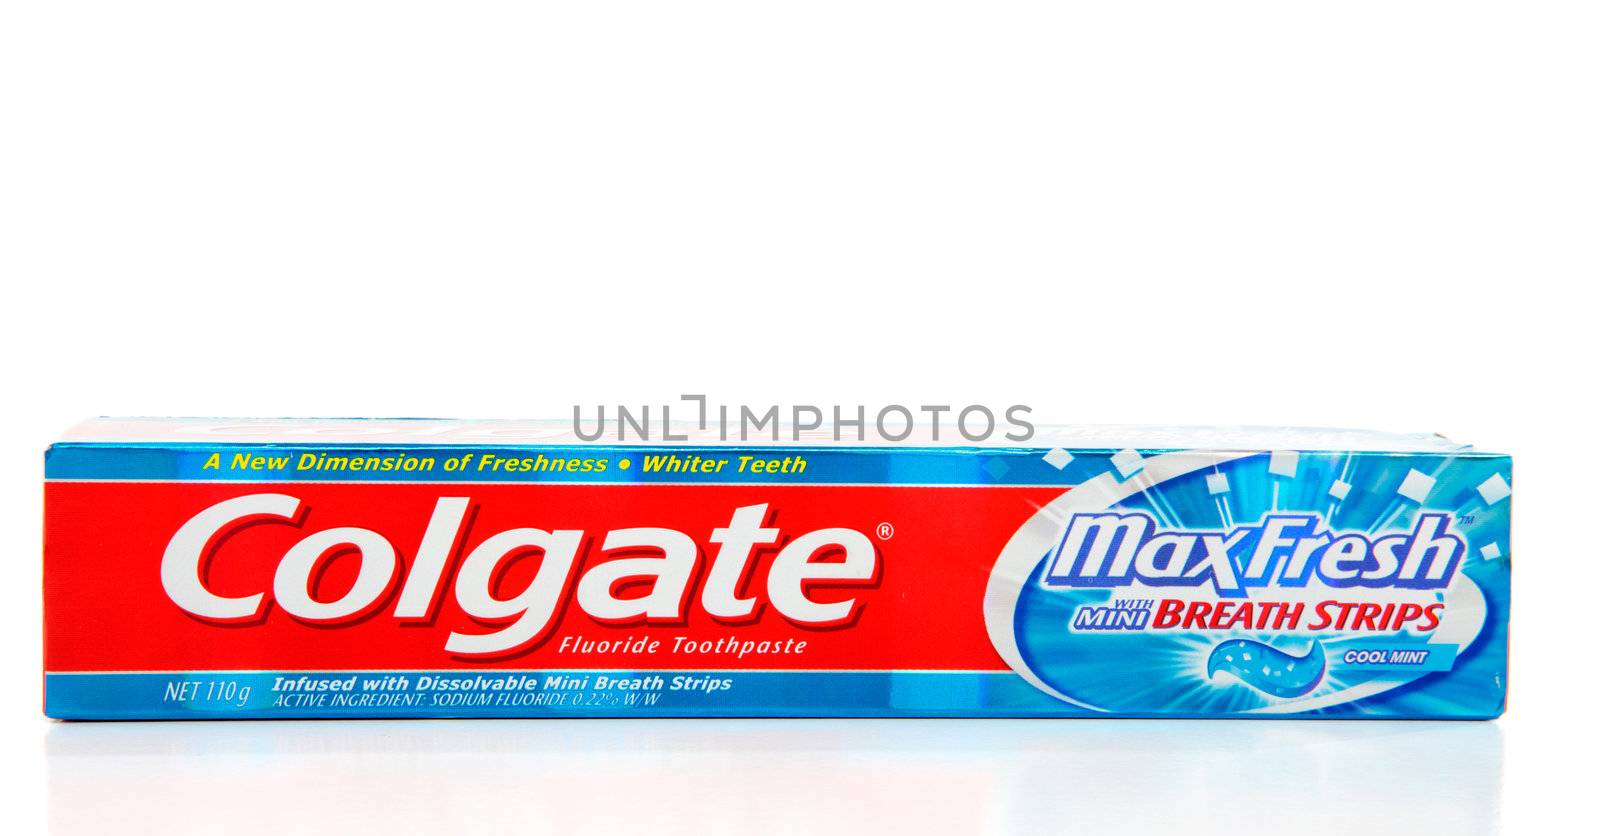 Colgate Max Fresh with Breath strips toothpaste by lovleah